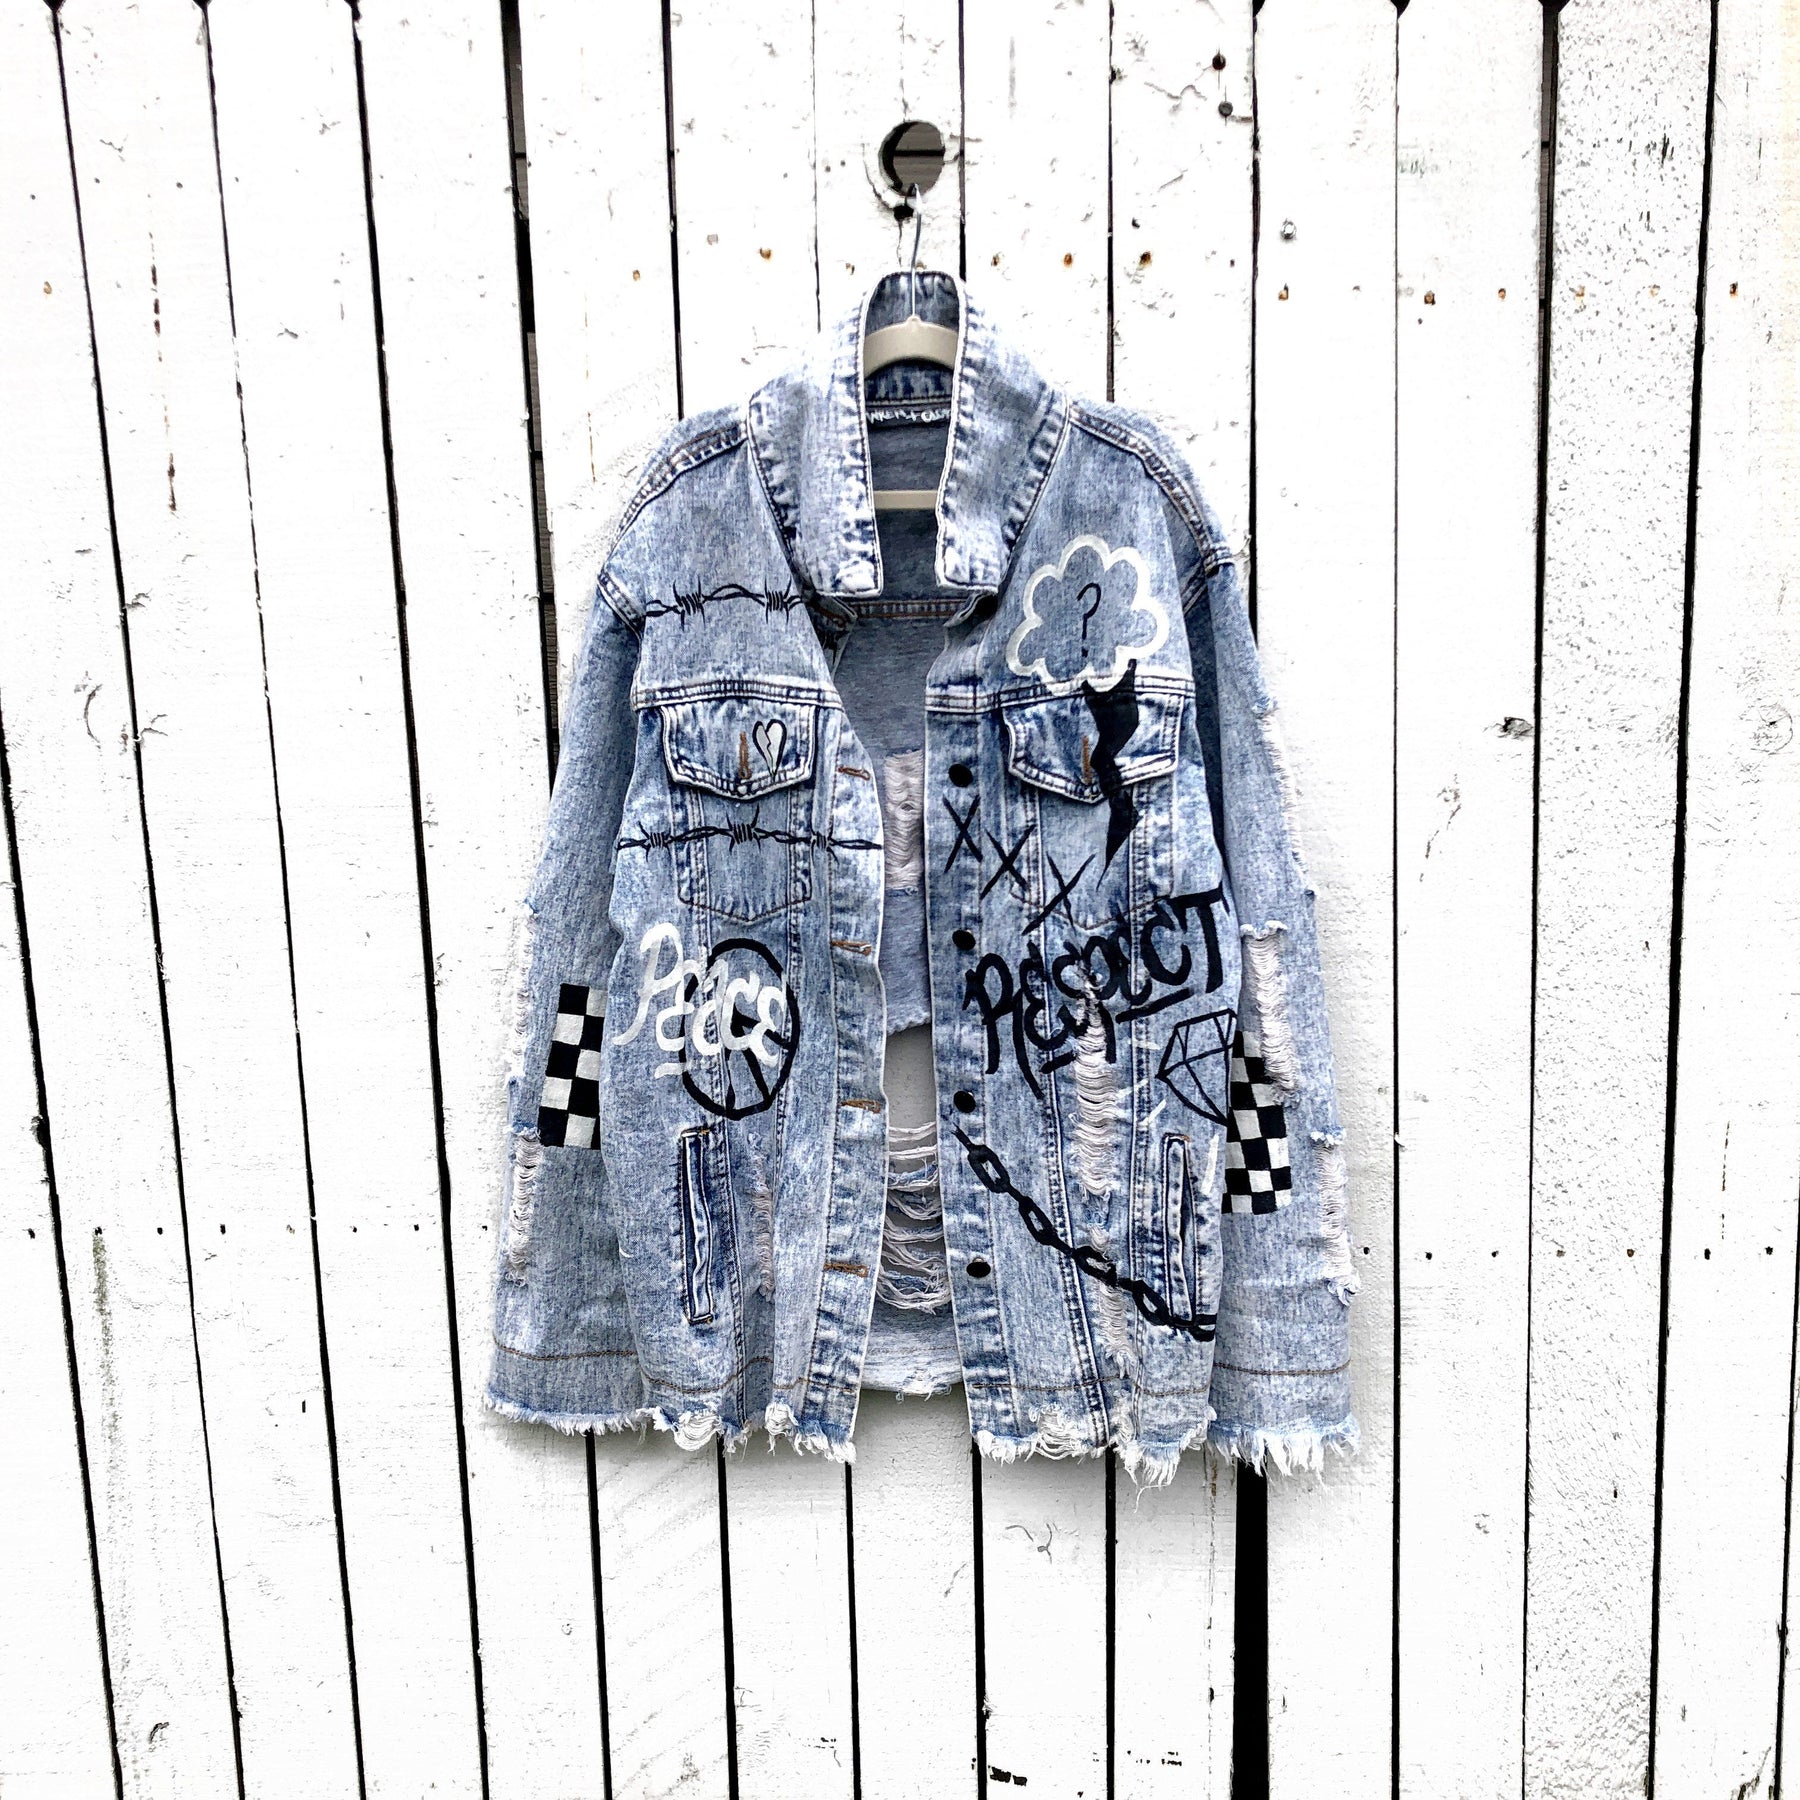 Light blue denim wash. Graffiti style paint throughout entire jacket, in black and white. Choose your name and city to be painted on. Please specify info above. Signed @wrenandglory.